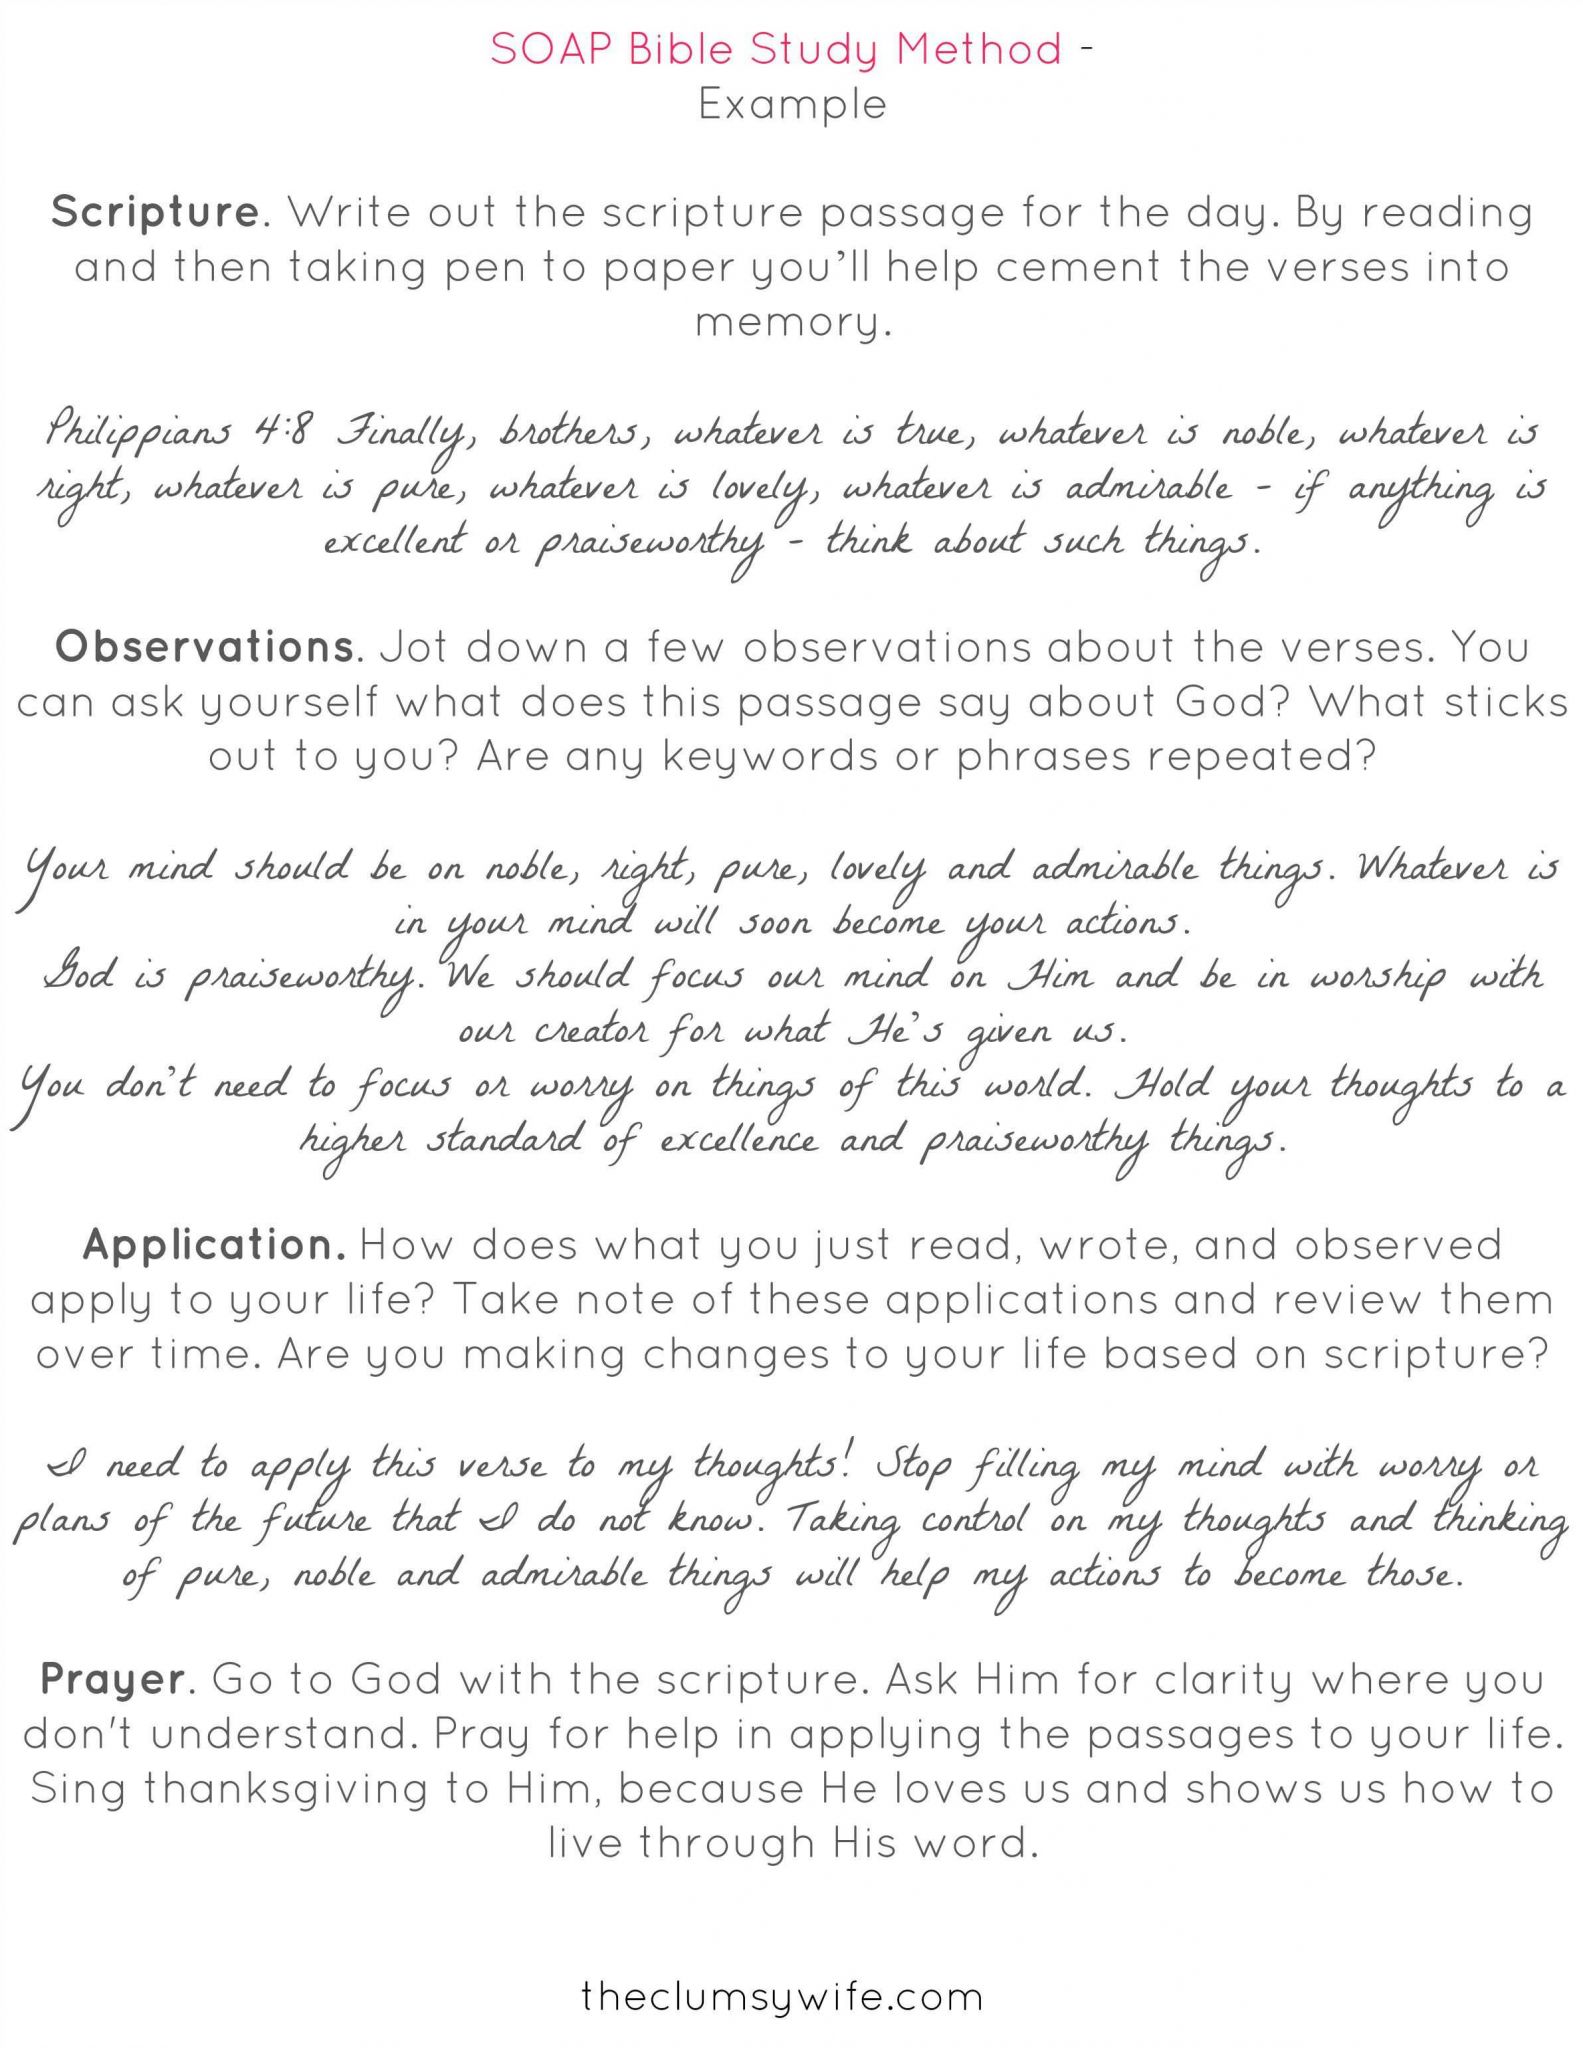 Free Inductive Bible Study Worksheets with soap Bible Study Method …